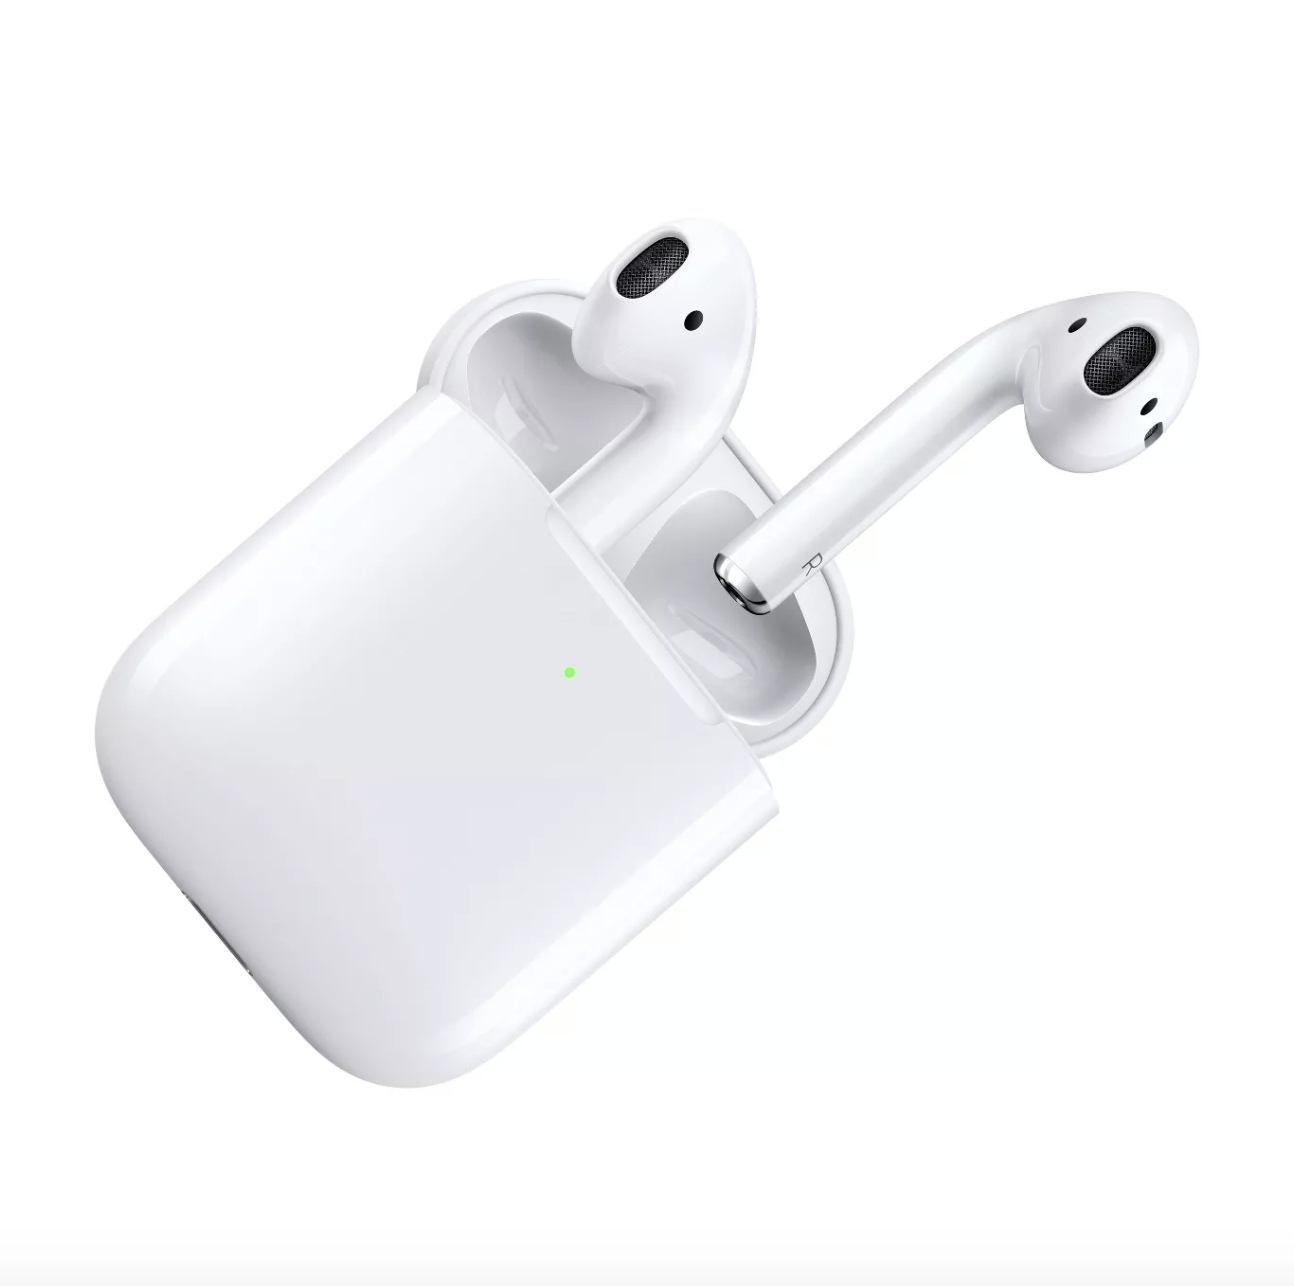 the white AirPods